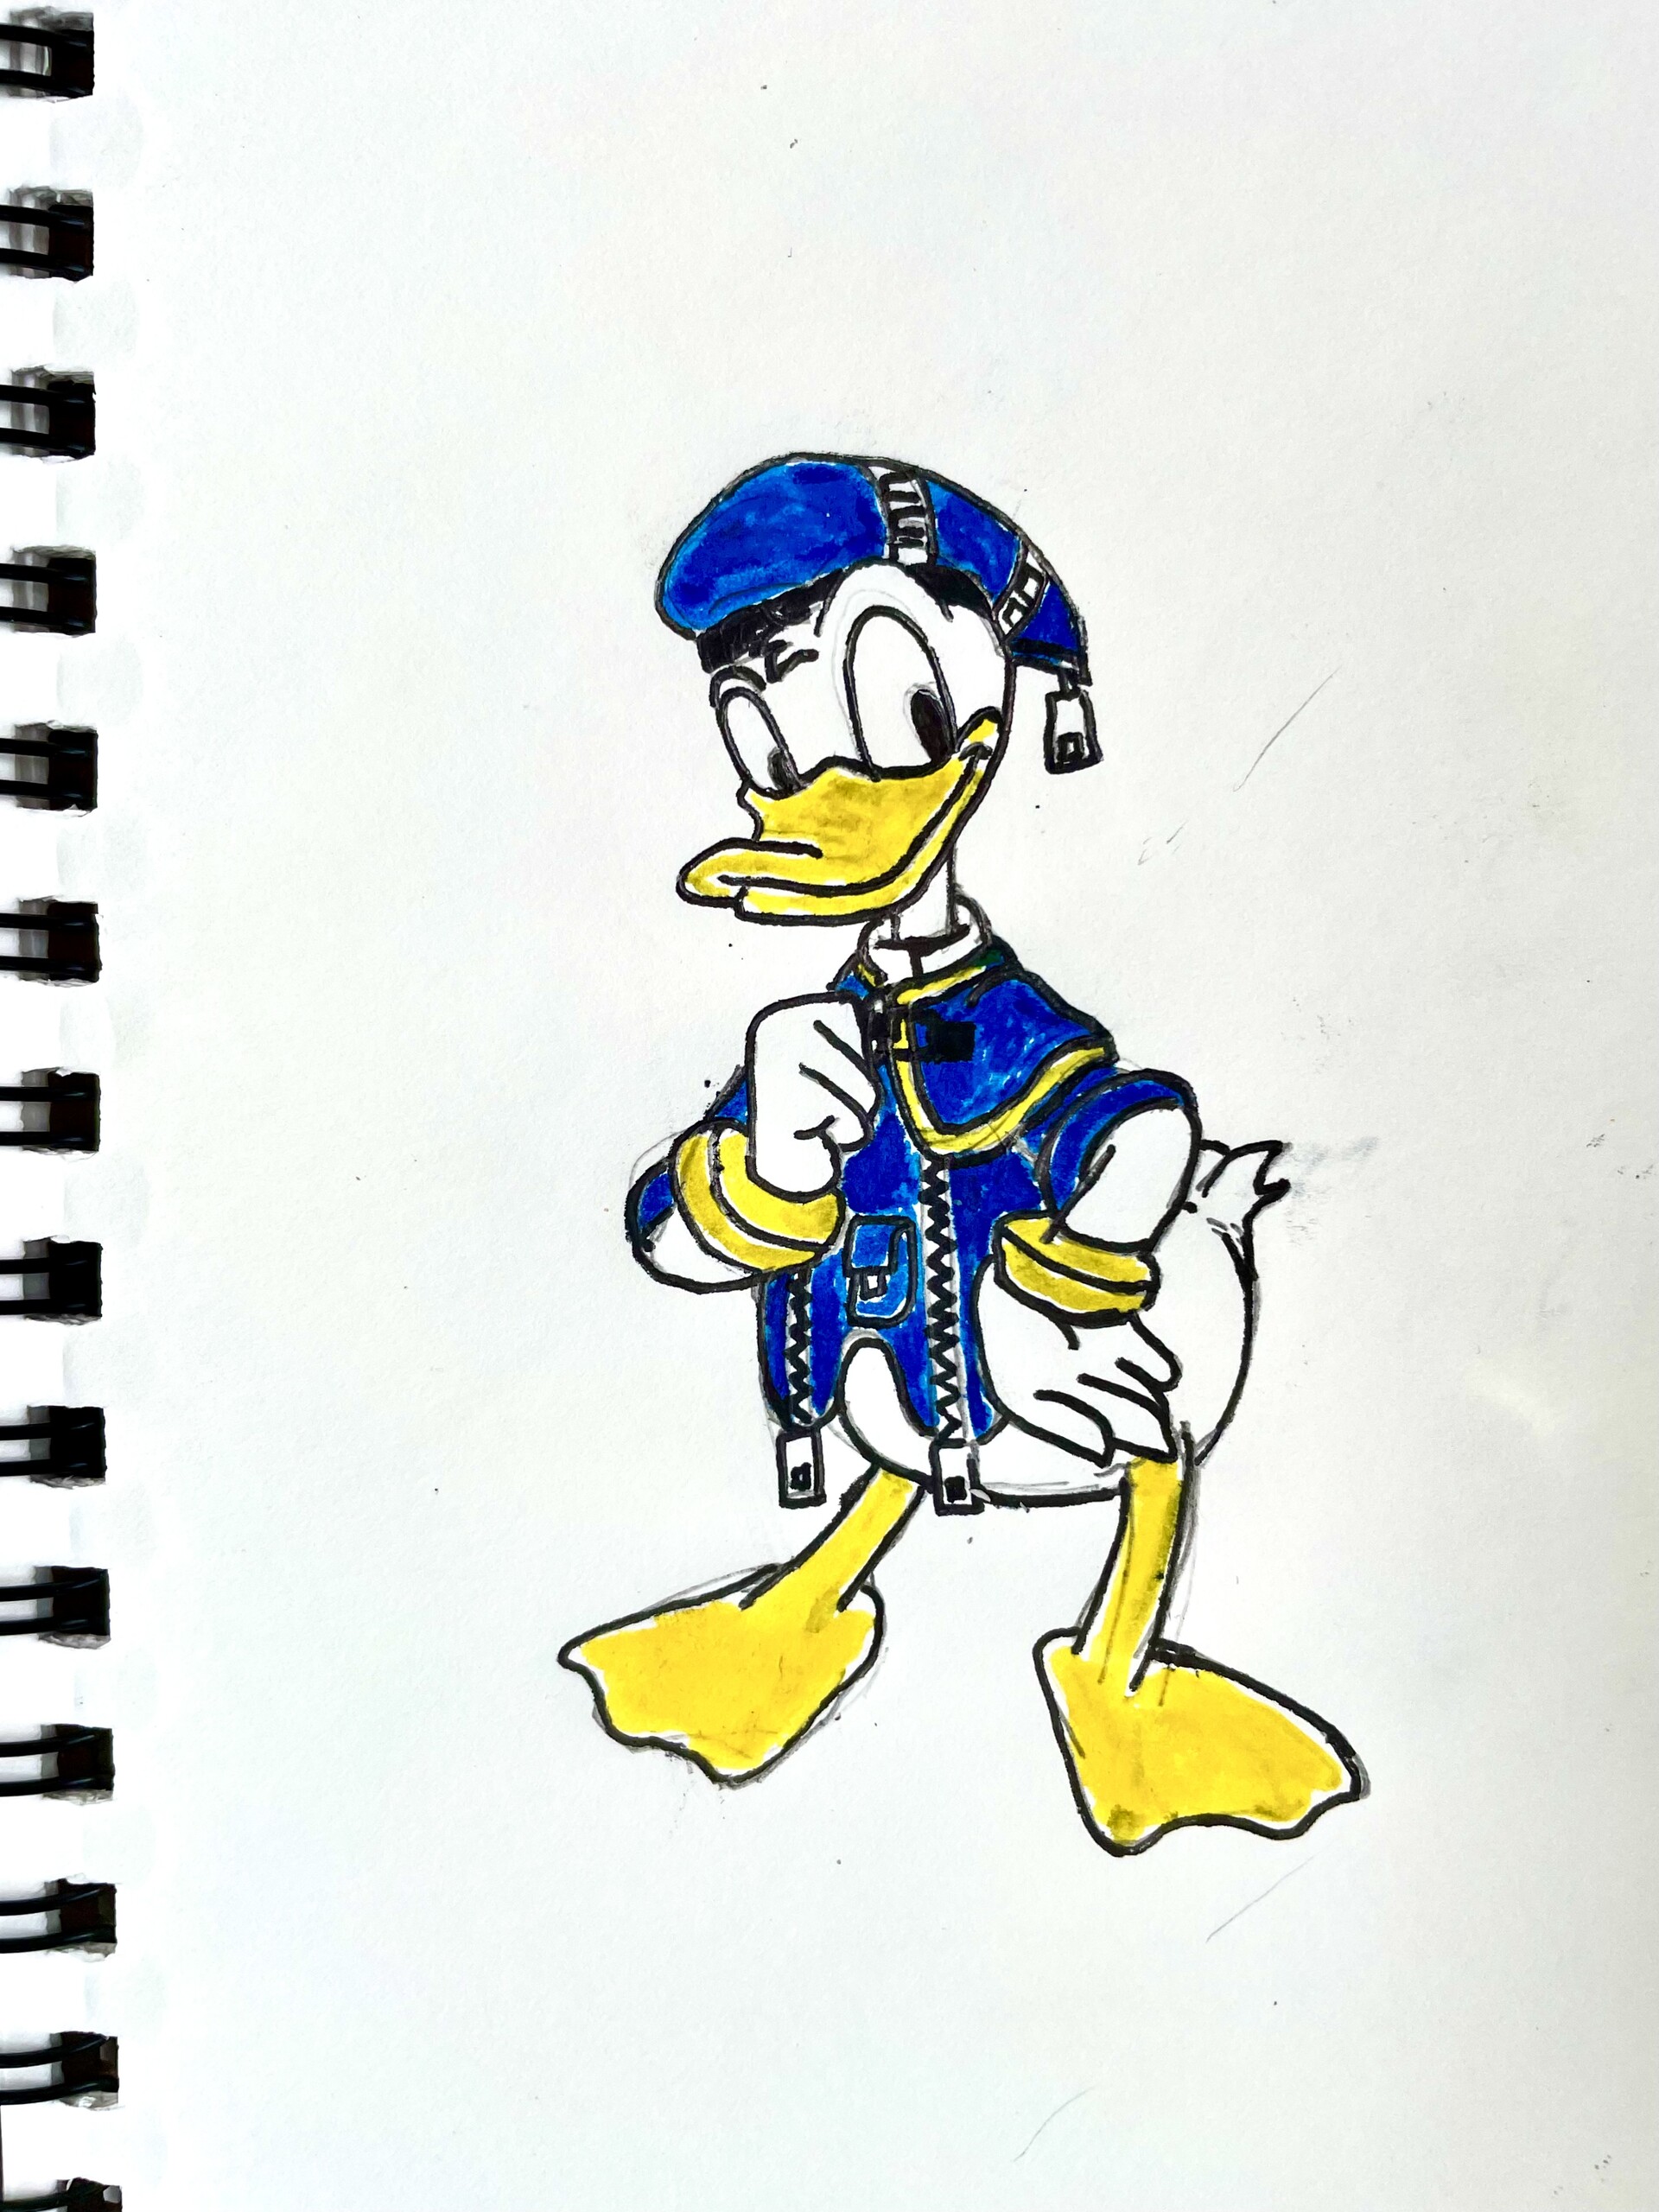 EXTREMELY Rare Animation Drawing of Donald Duck from The Wise Little Hen,  1934, in C E's Disney Studio Pt. 5 - Animation Drawings for Mickey and  Donald Shorts Comic Art Gallery Room